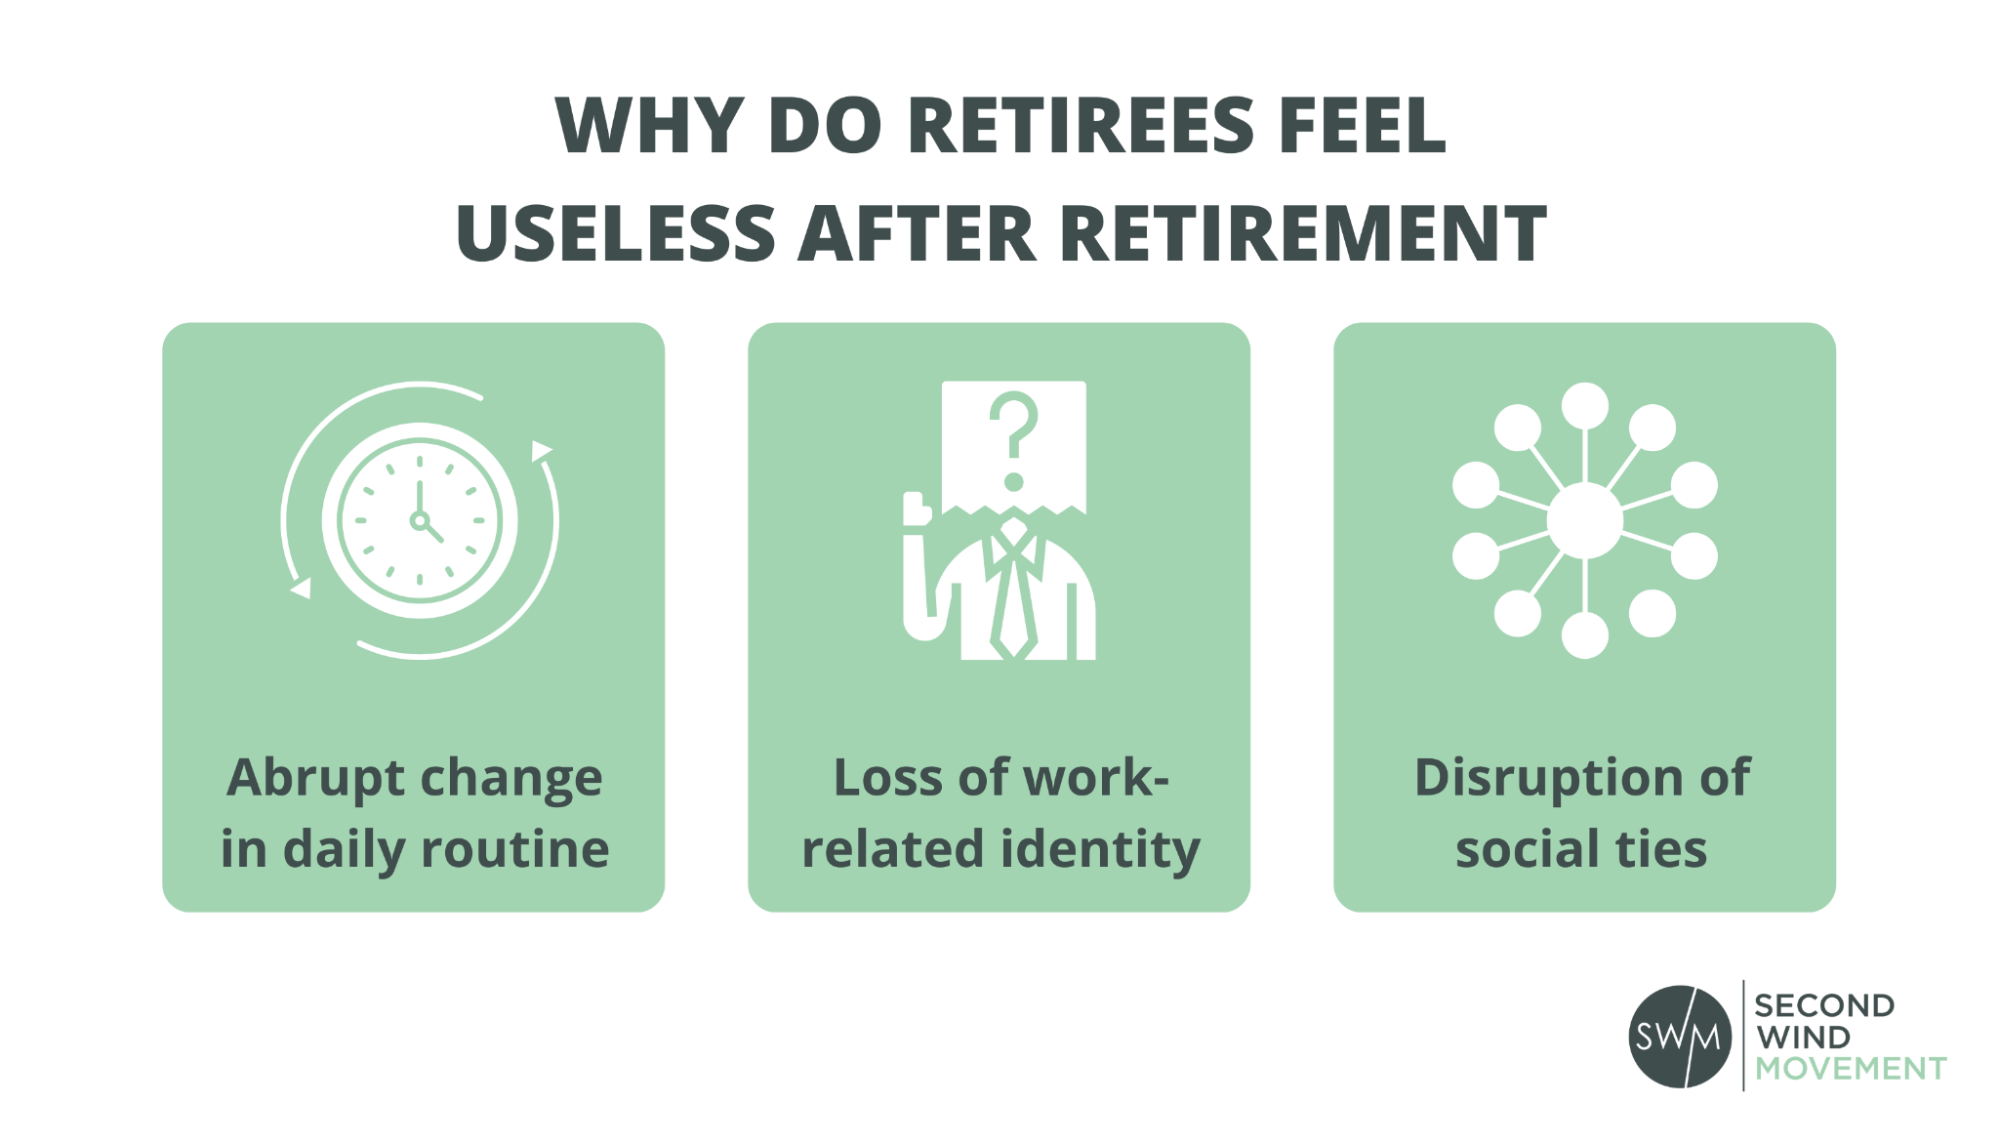 why do retirees feel useless after retirement: abrupt change in daily routine, loss of work-related identity, disruption of social ties